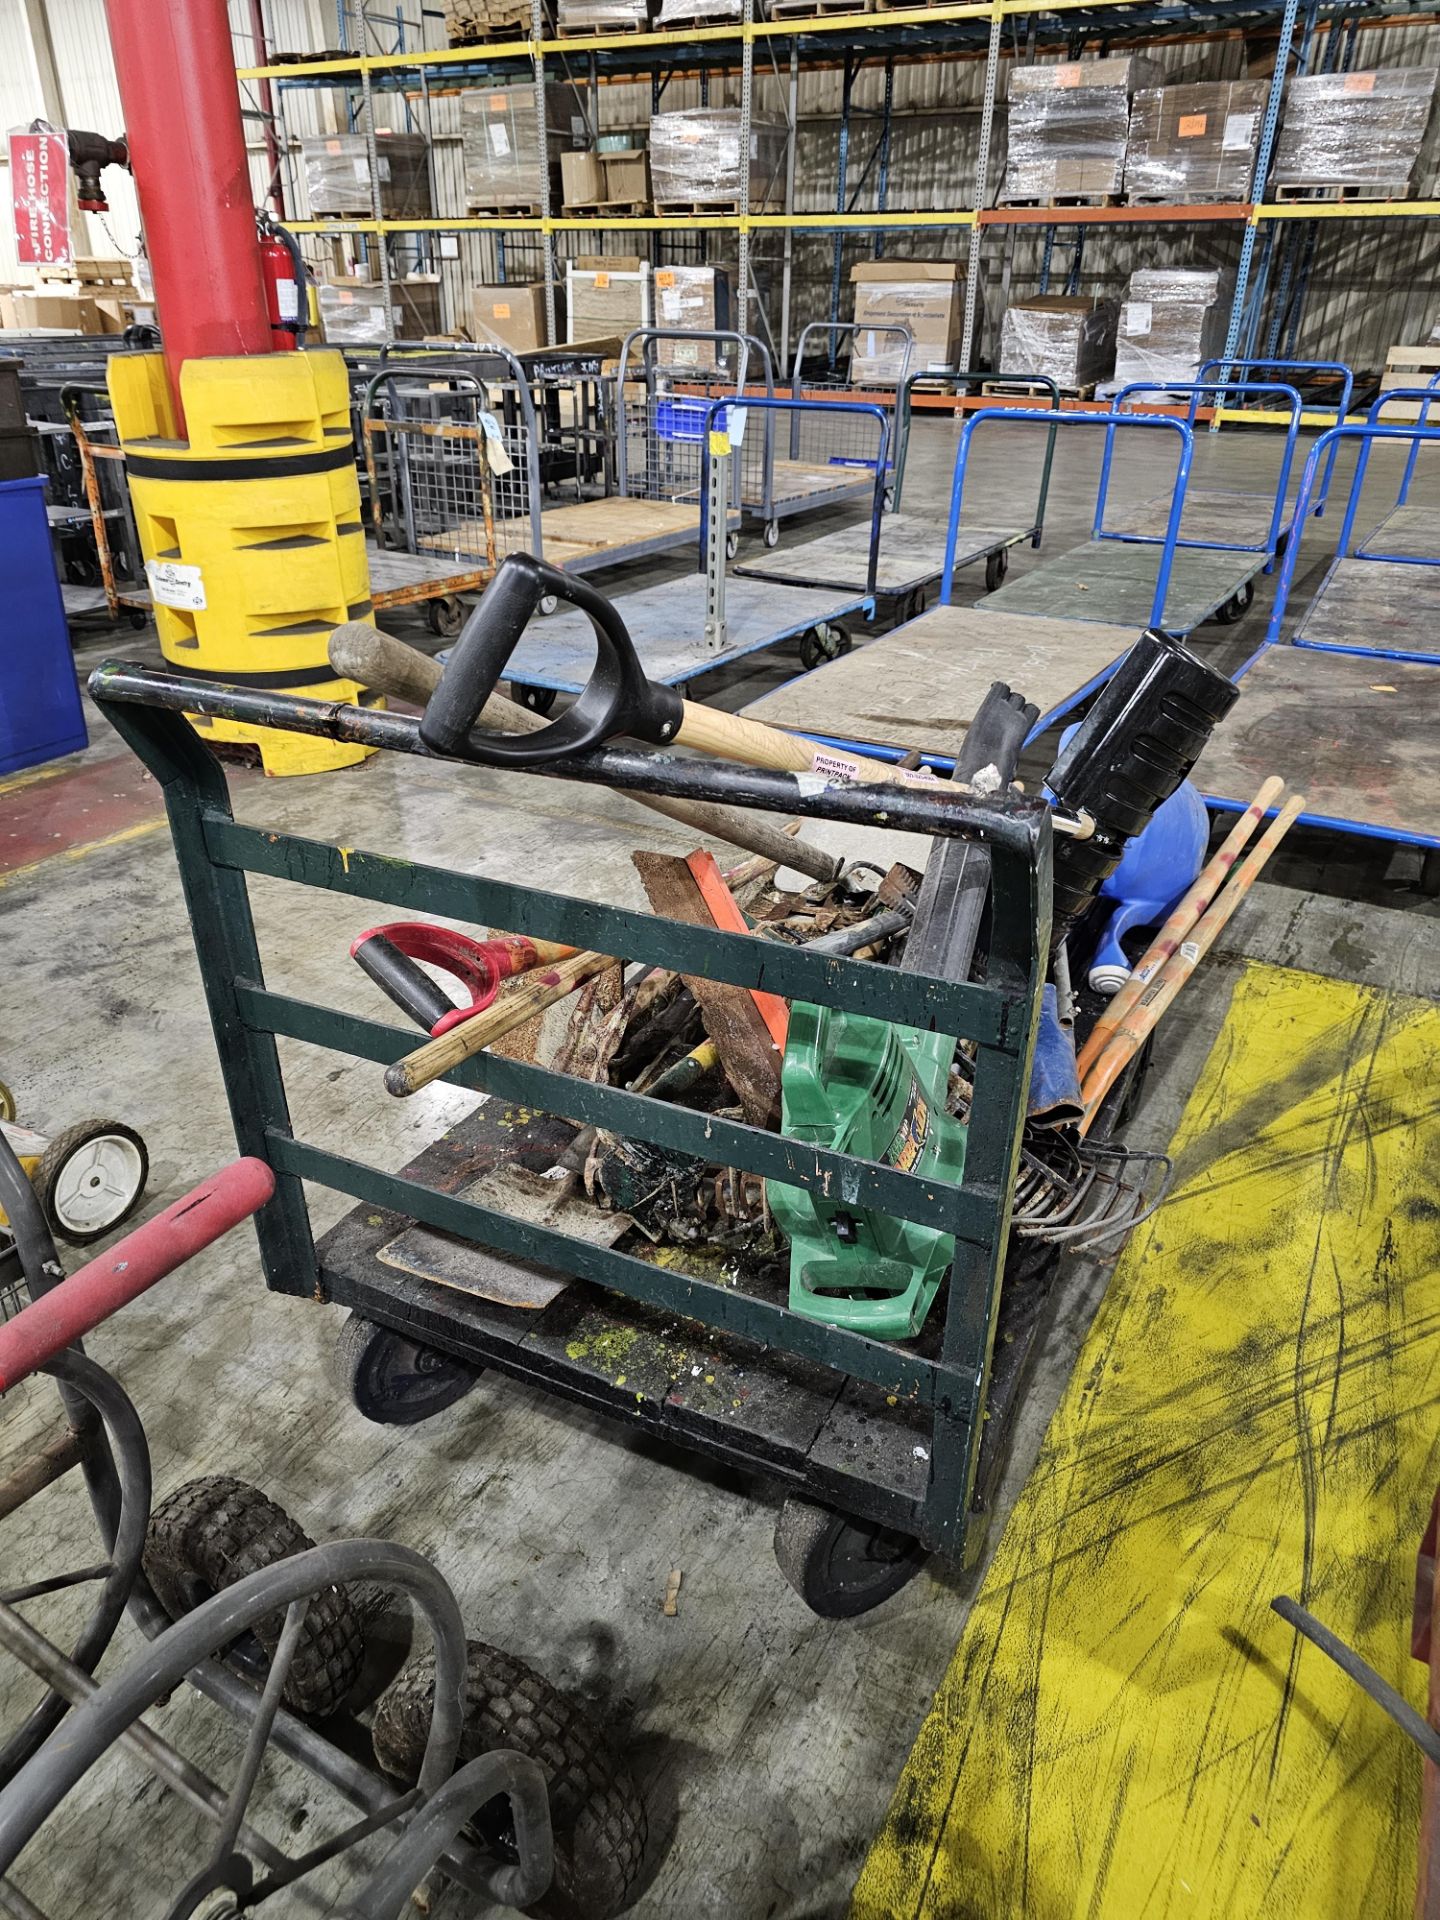 Carts with Outdoor Tools and Hose Reel - Image 3 of 5